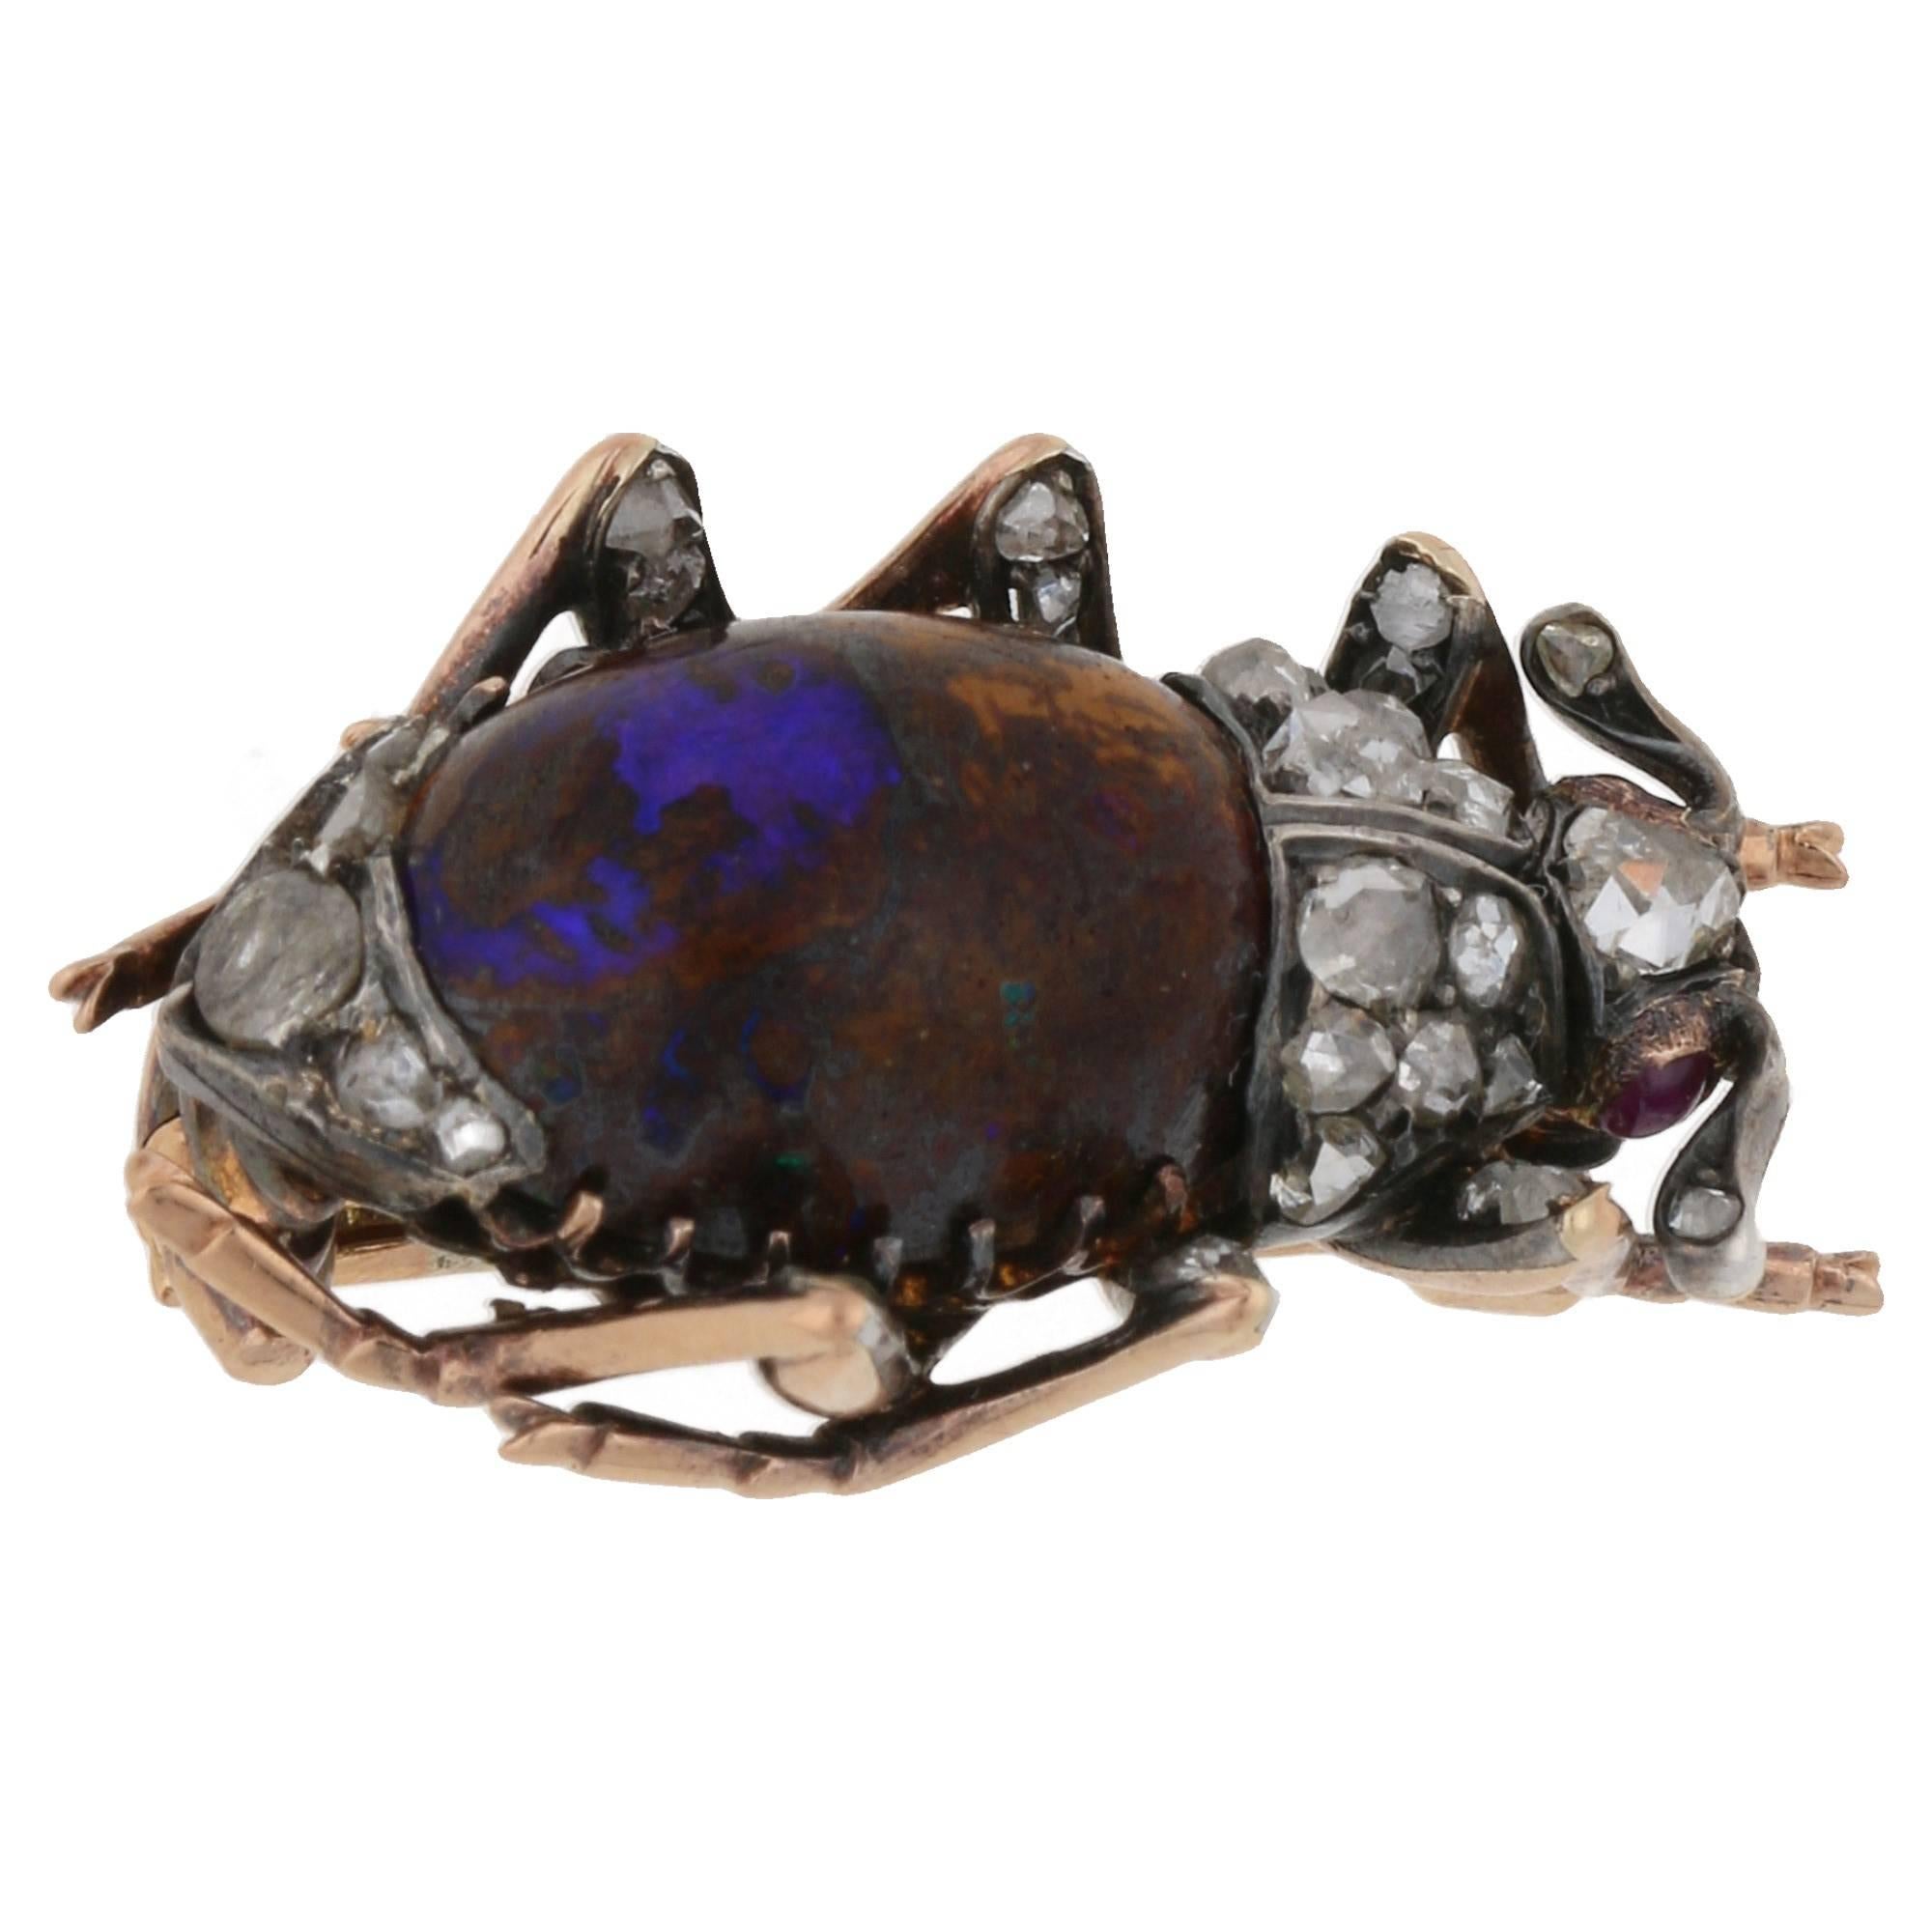 A delightful Victorian boulder opal and rose cut diamond bug brooch set in silver on gold. The abdomen is an unusual blue boulder opal claw set between 9ct yellow gold legs topped in silver set with rose cut diamond accents. The thorax is grain set